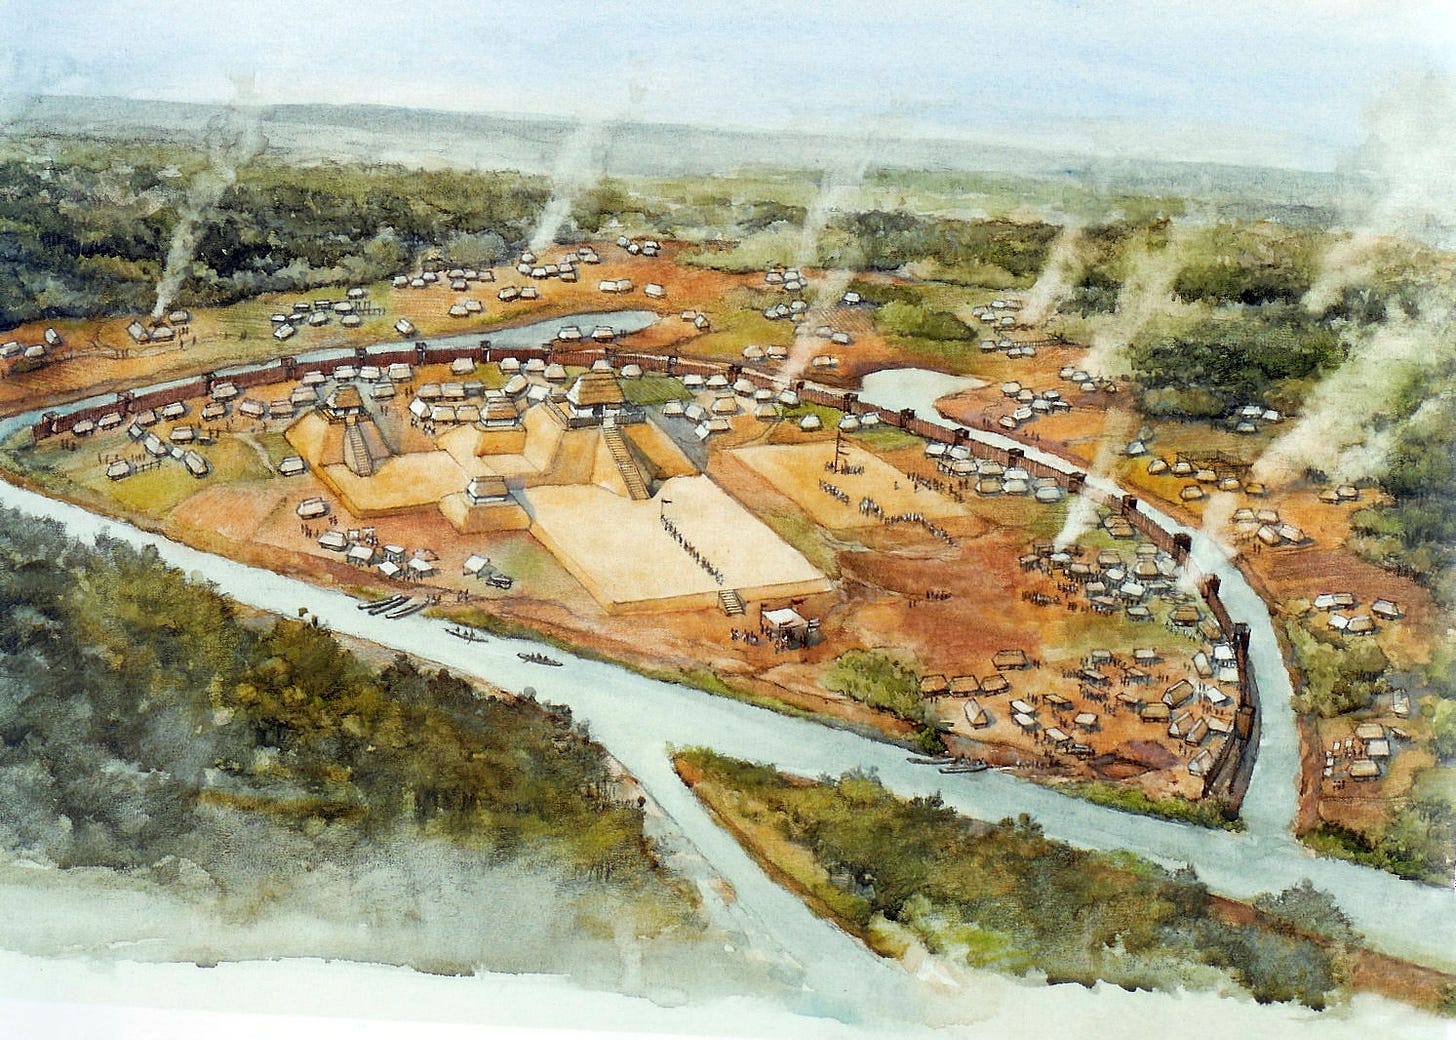 Etowah, a site of the Mississippian culture, 1000-1550 AD, Georgia, USA:  papertowns